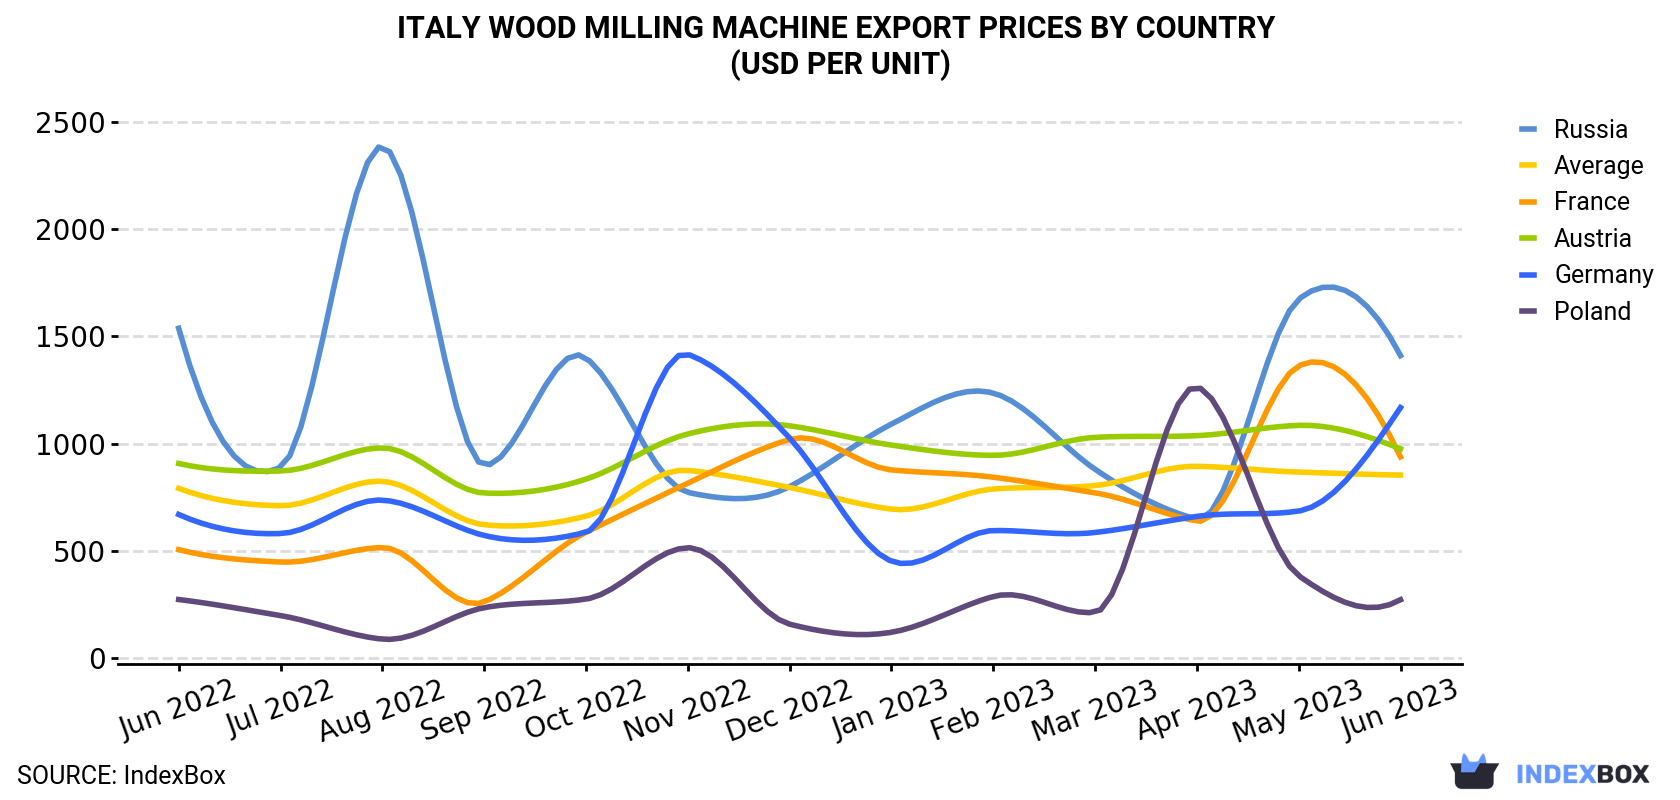 Italy Wood Milling Machine Export Prices By Country (USD Per Unit)